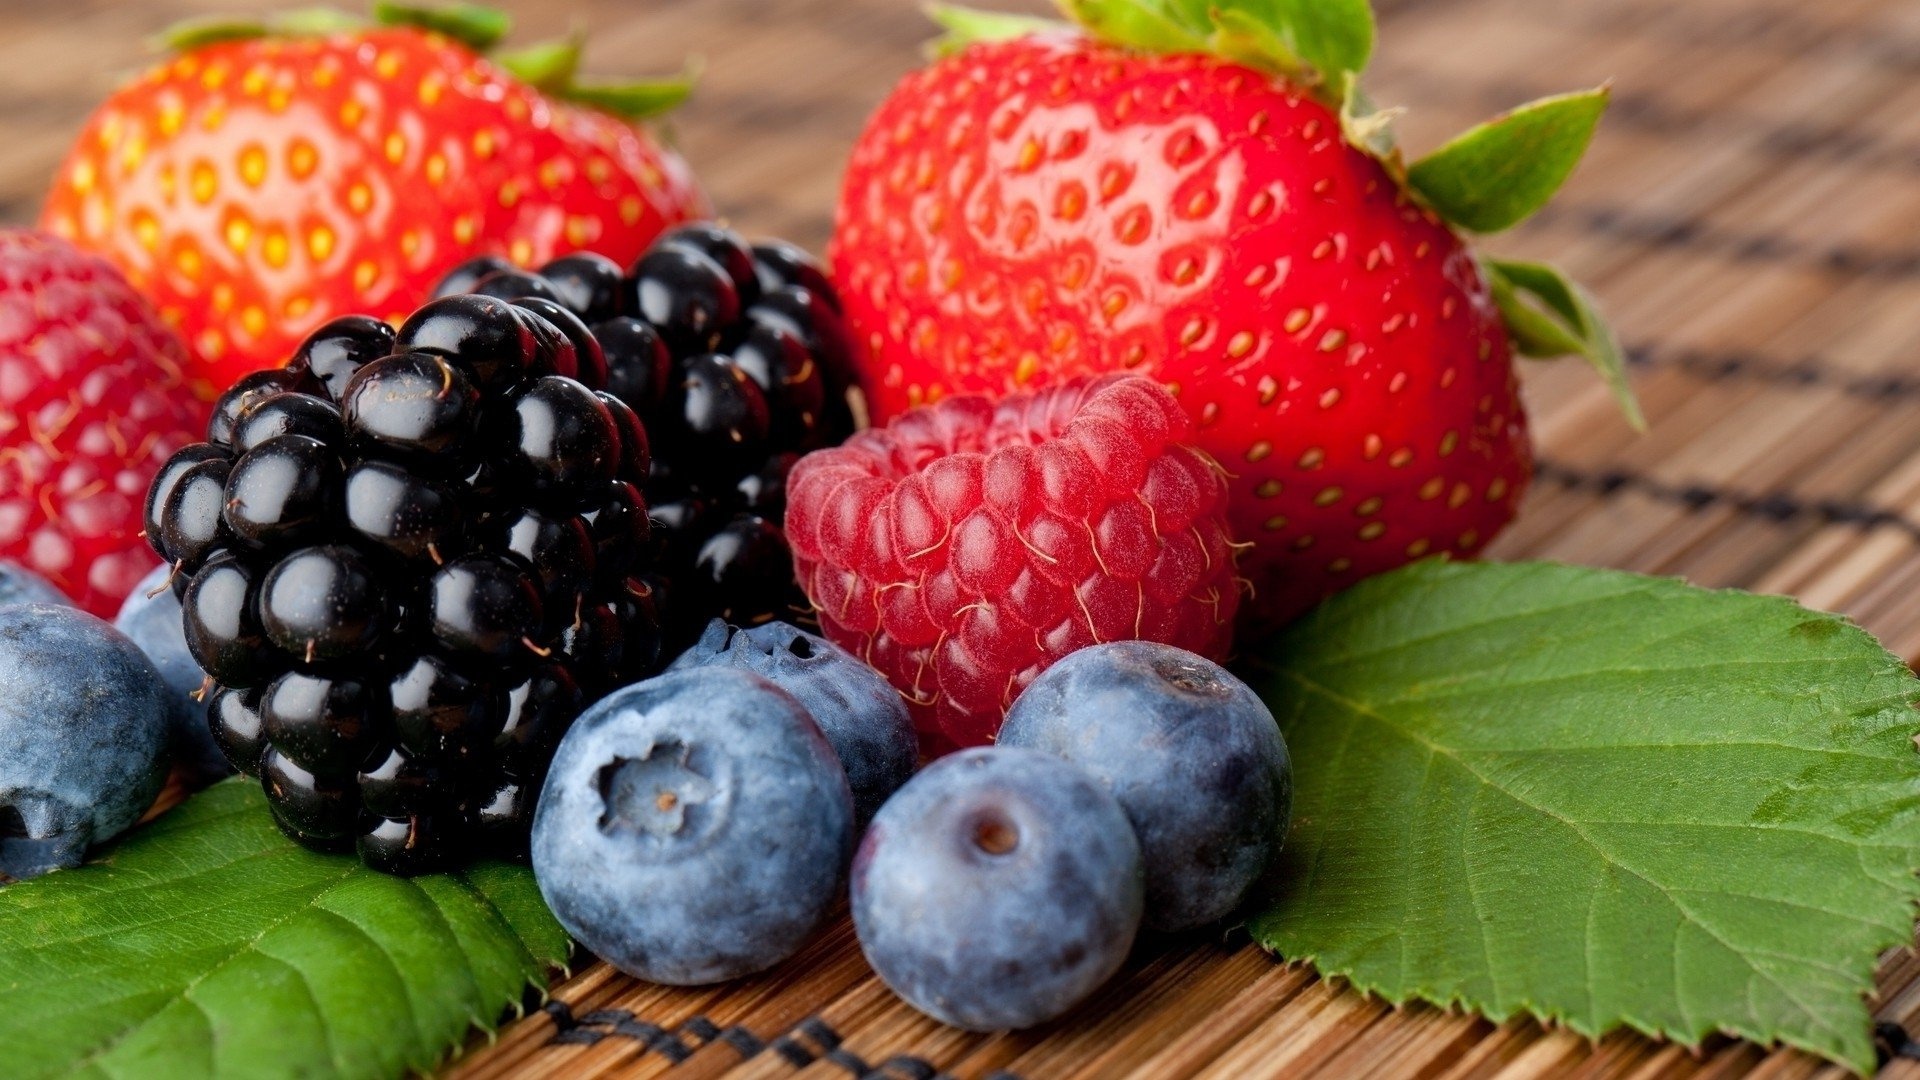 Mesmerizing HD wallpaper, Irresistible berry image, Juicy and flavorful, Sumptuous delight, 1920x1080 Full HD Desktop